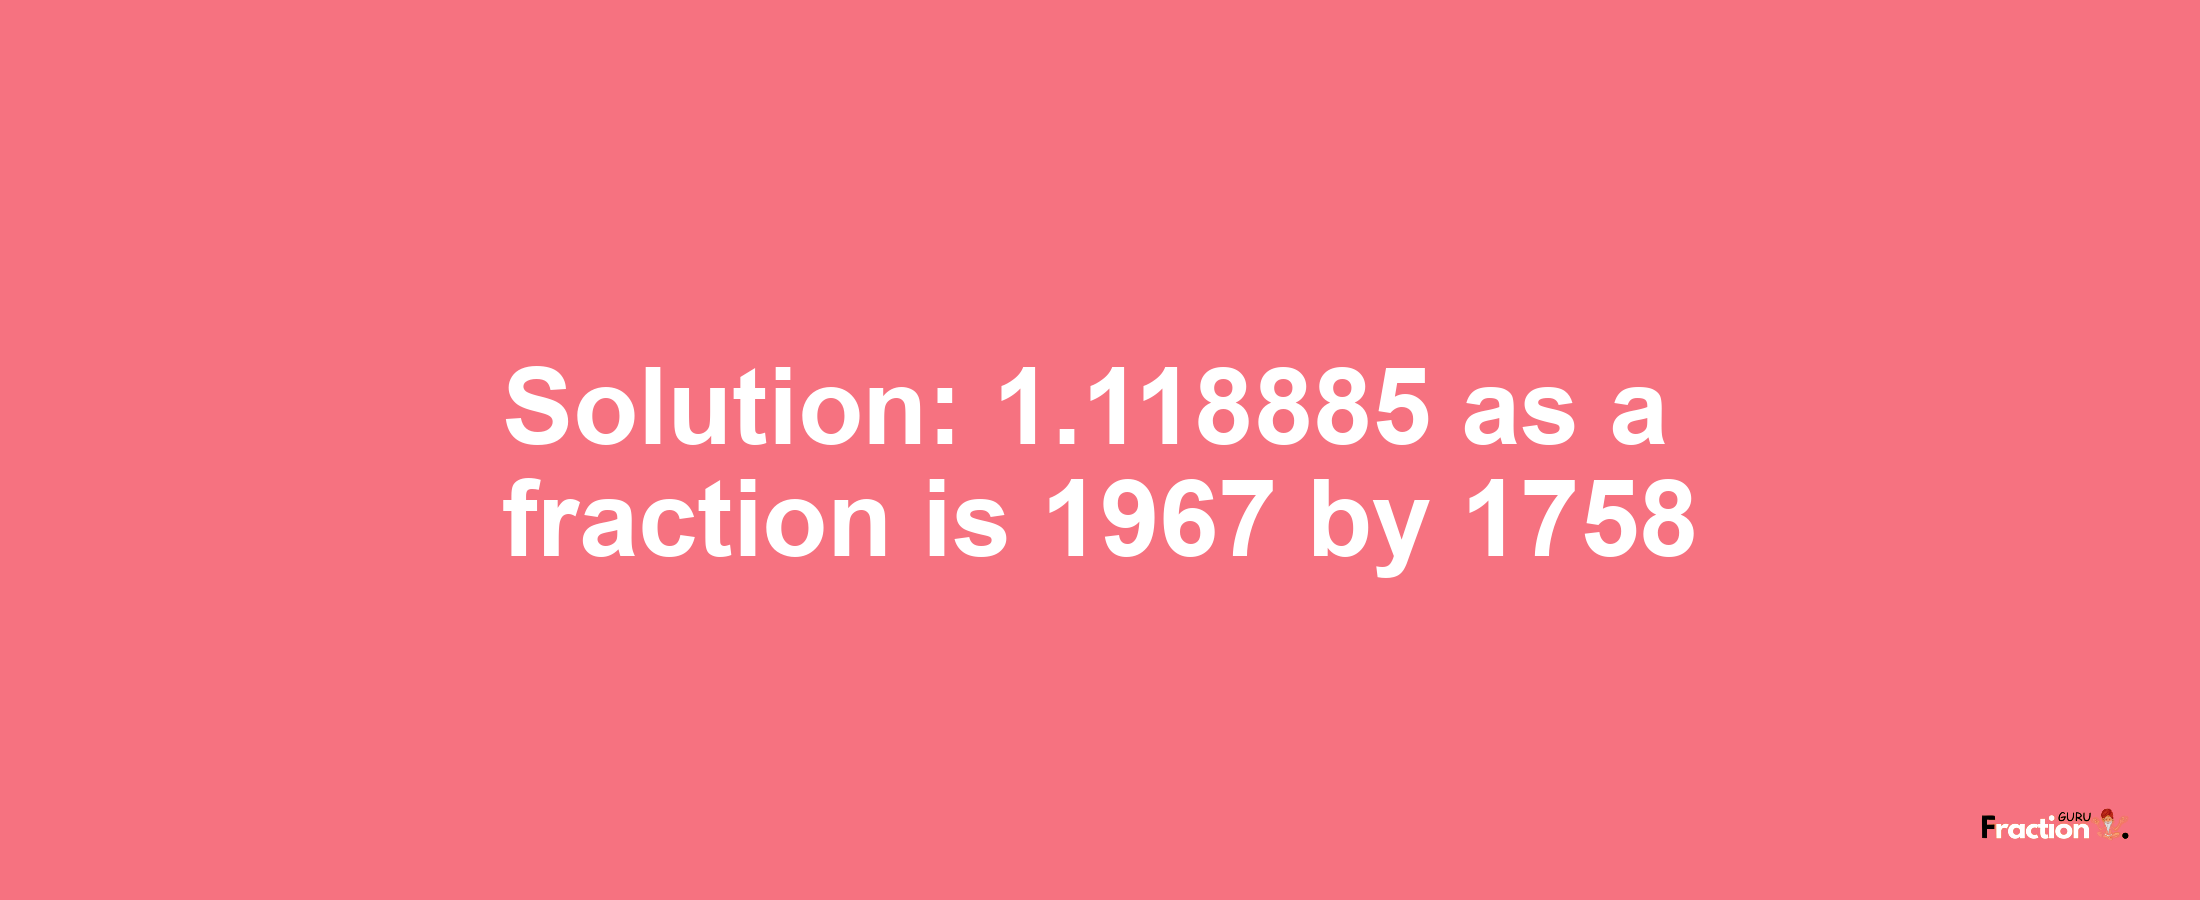 Solution:1.118885 as a fraction is 1967/1758